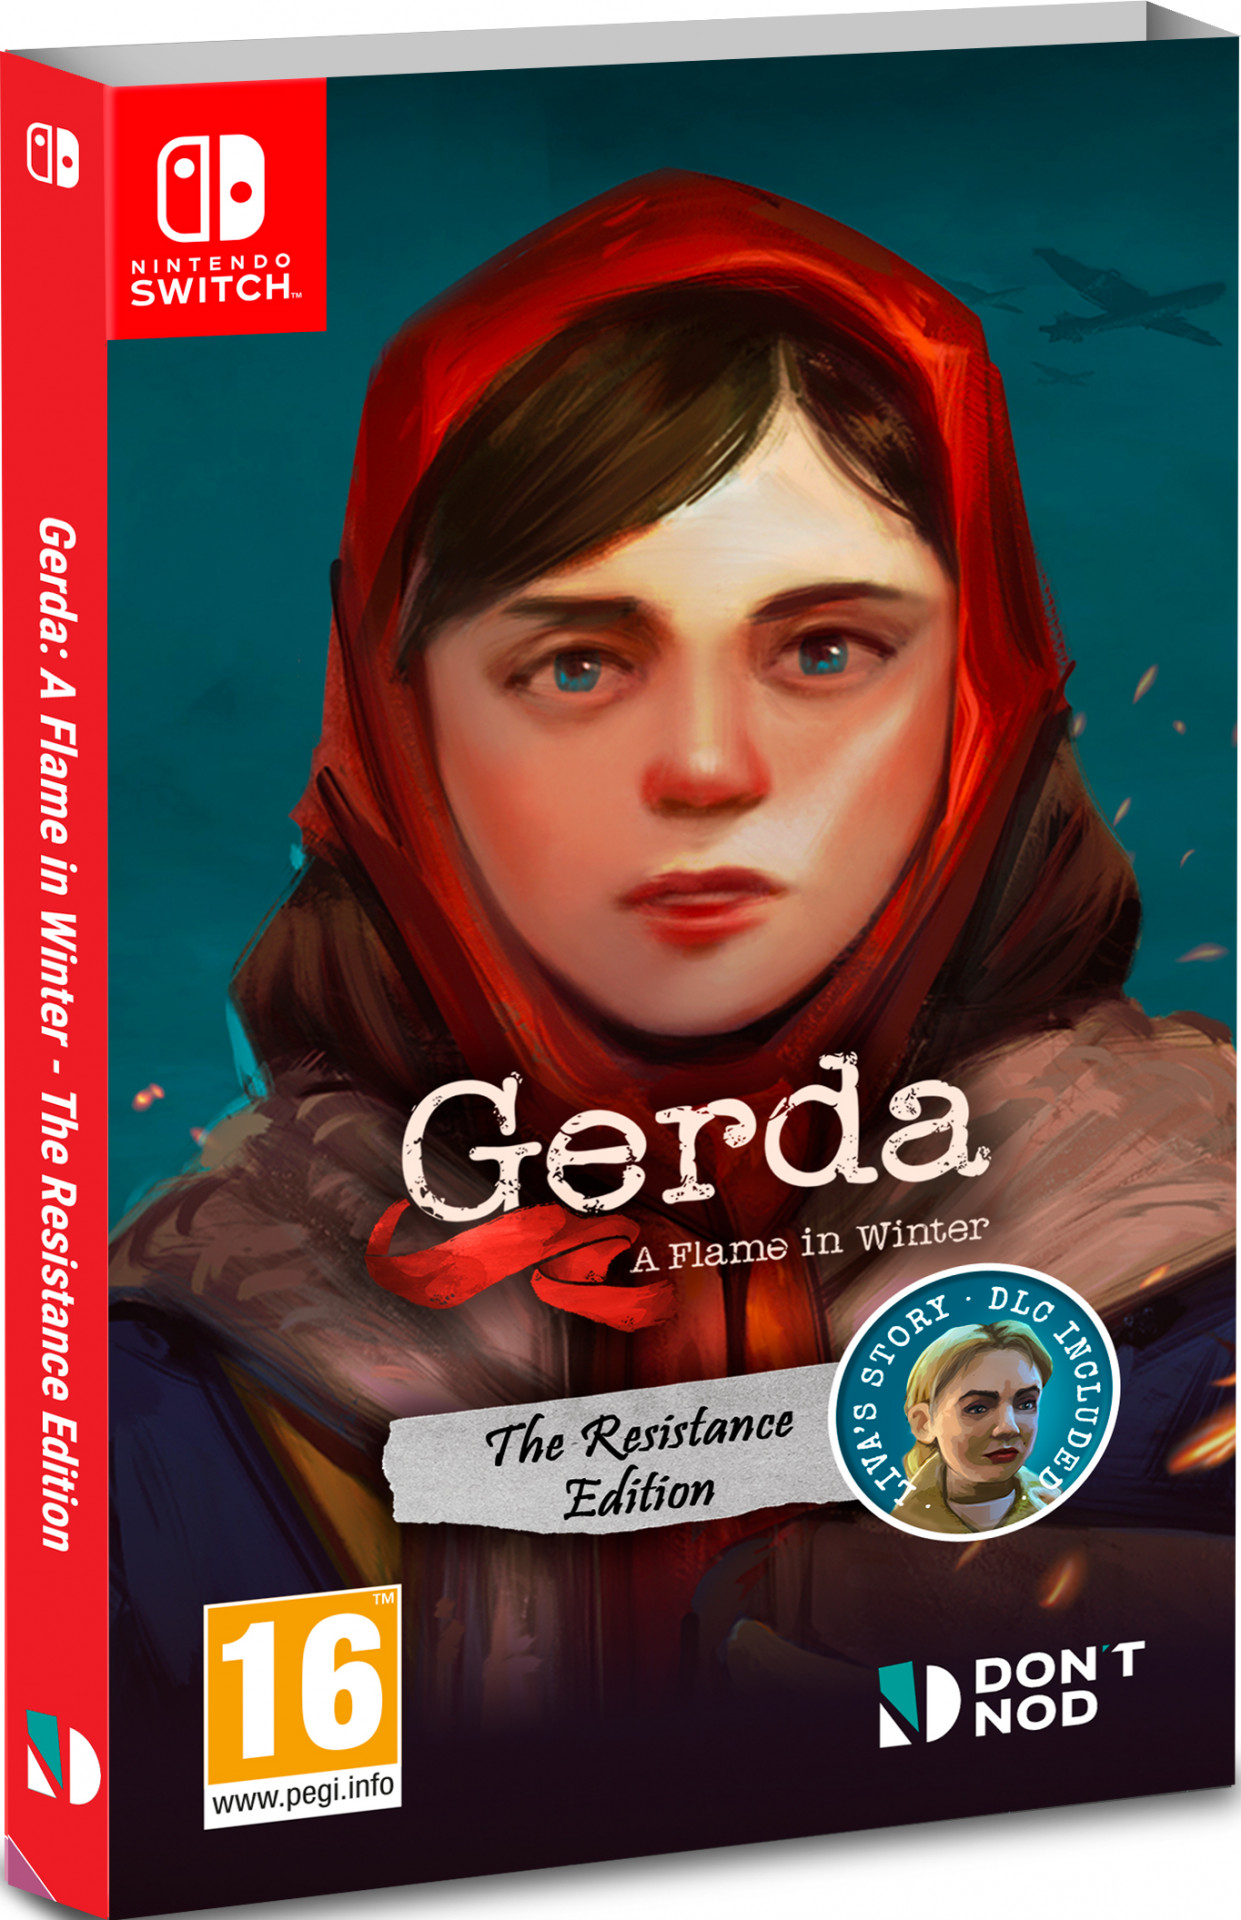 Gerda: A Flame In Winter - The Resistance Edition (Switch), Don't Nod